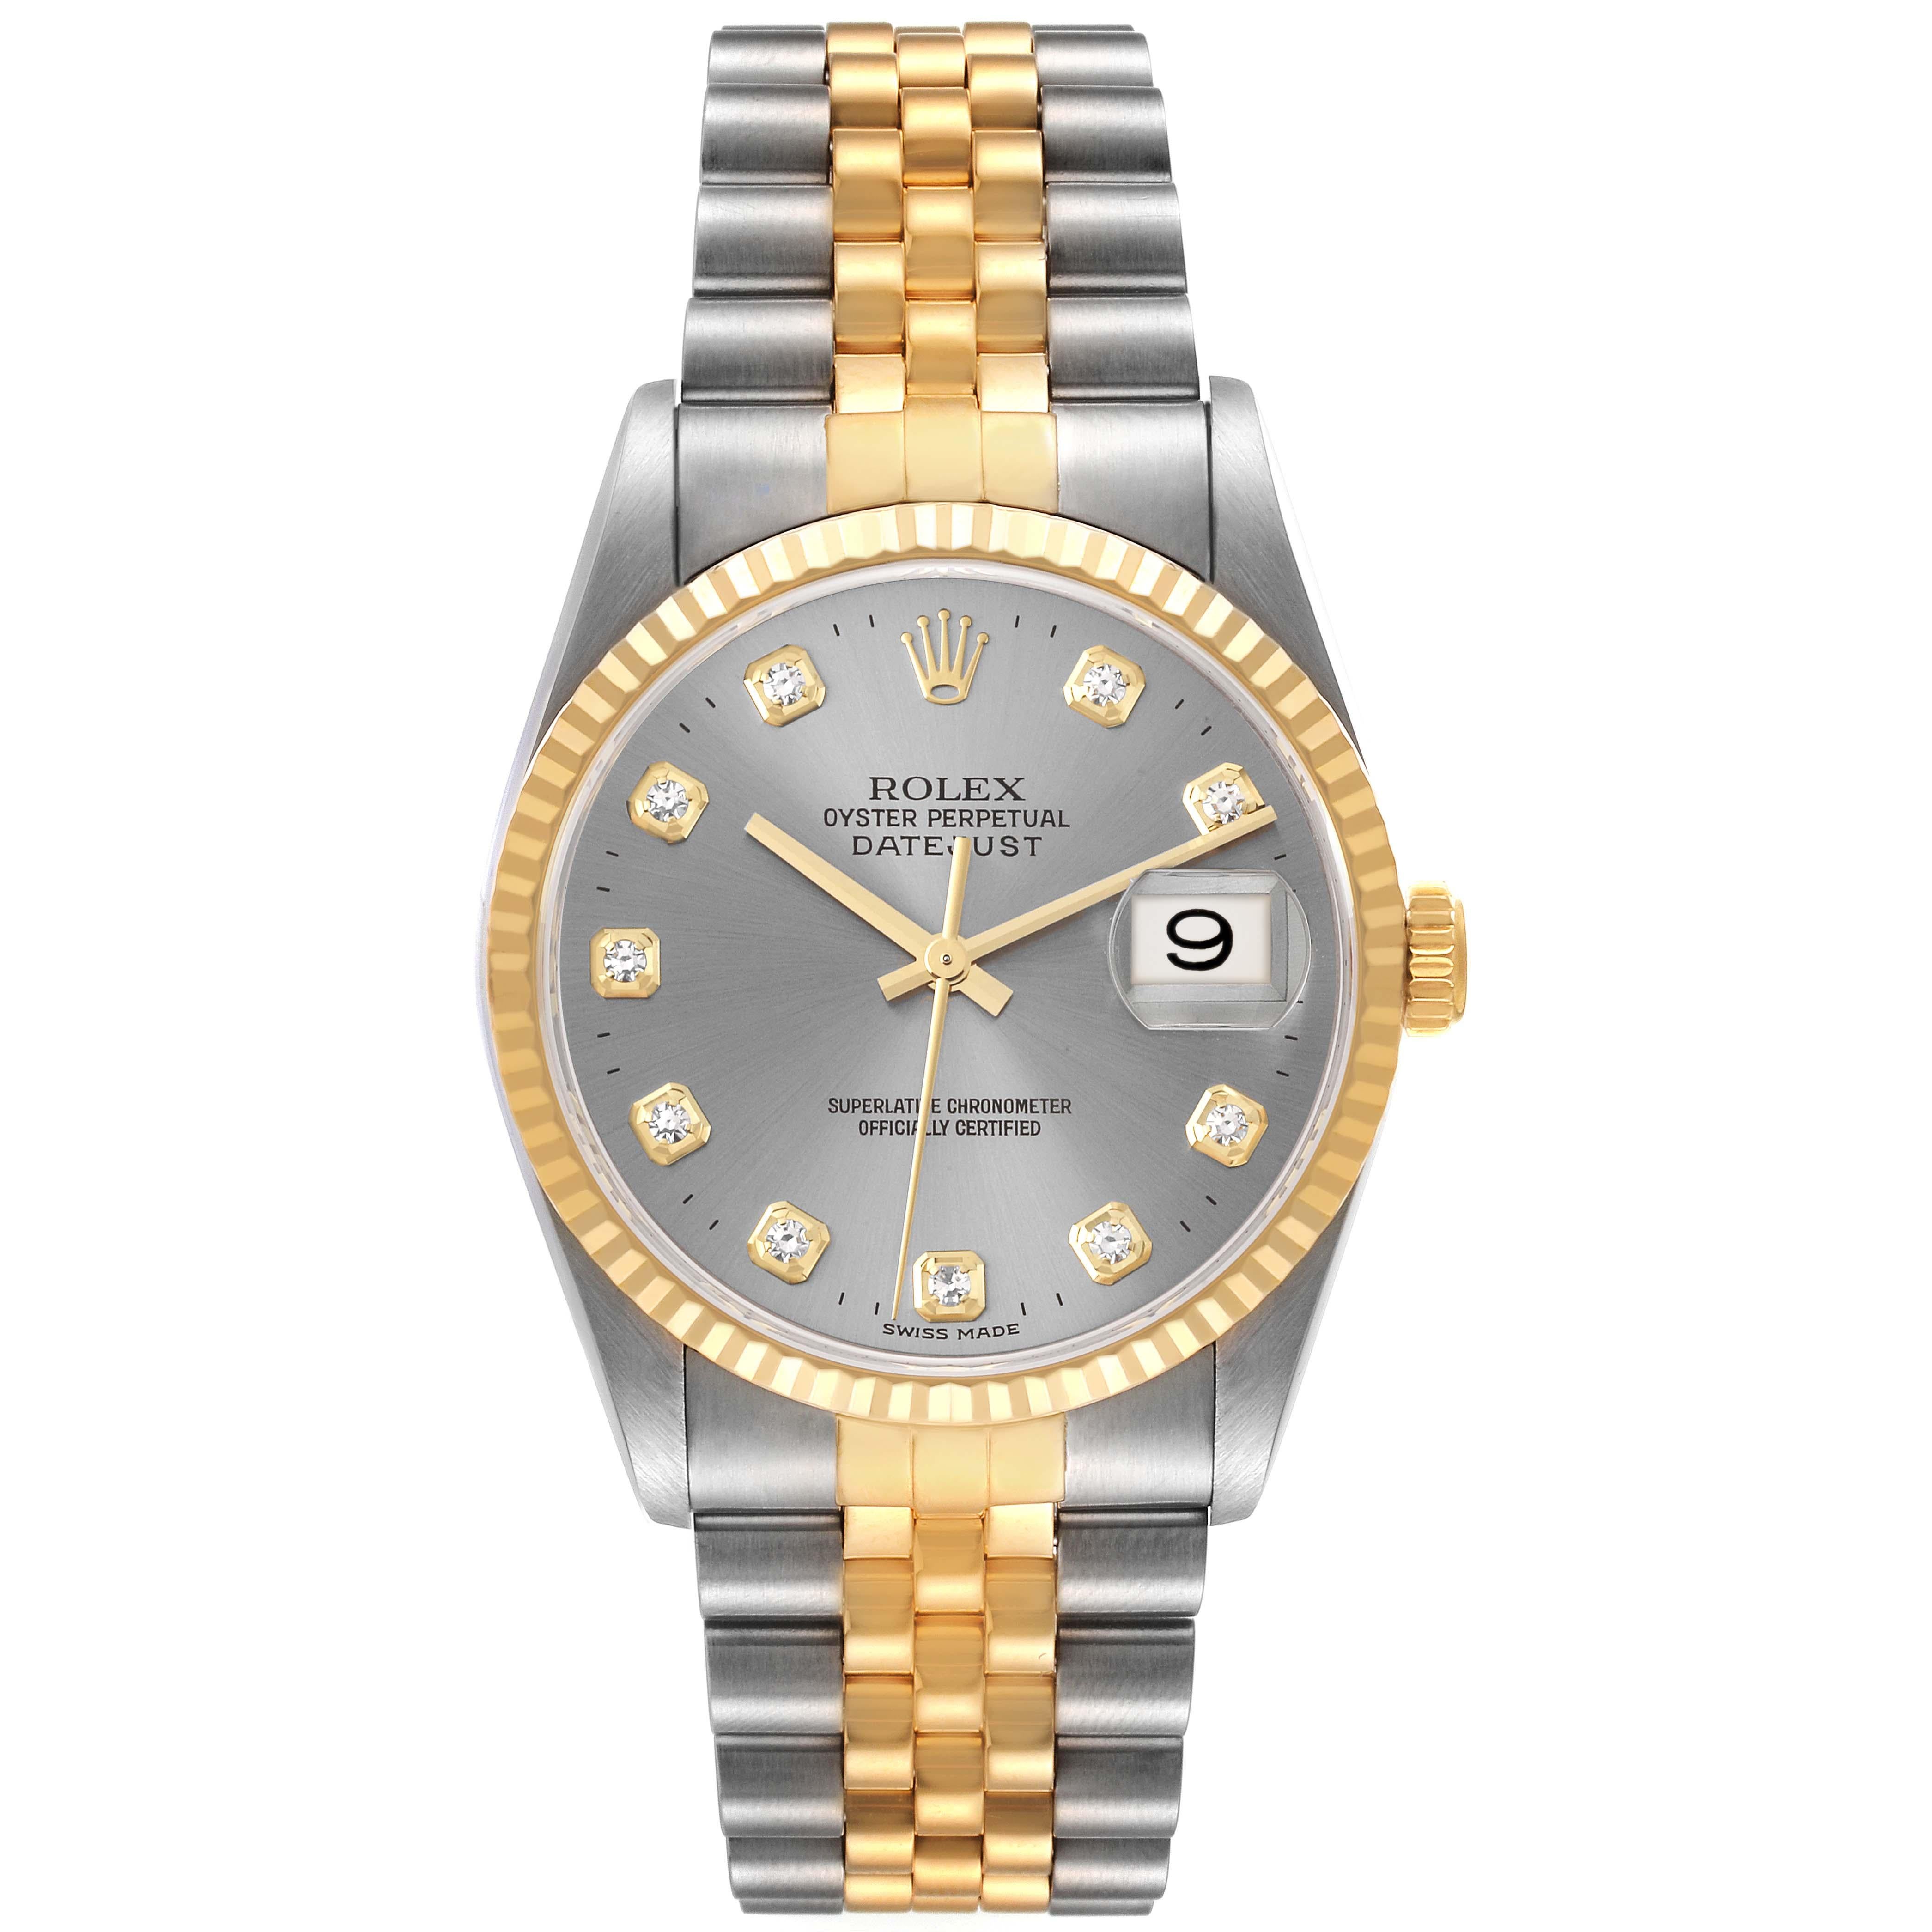 Rolex Datejust Slate Grey Diamond Dial Steel Yellow Gold Mens Watch 16233. Officially certified chronometer automatic self-winding movement. Stainless steel case 36 mm in diameter.  Rolex logo on an 18K yellow gold crown. 18k yellow gold fluted